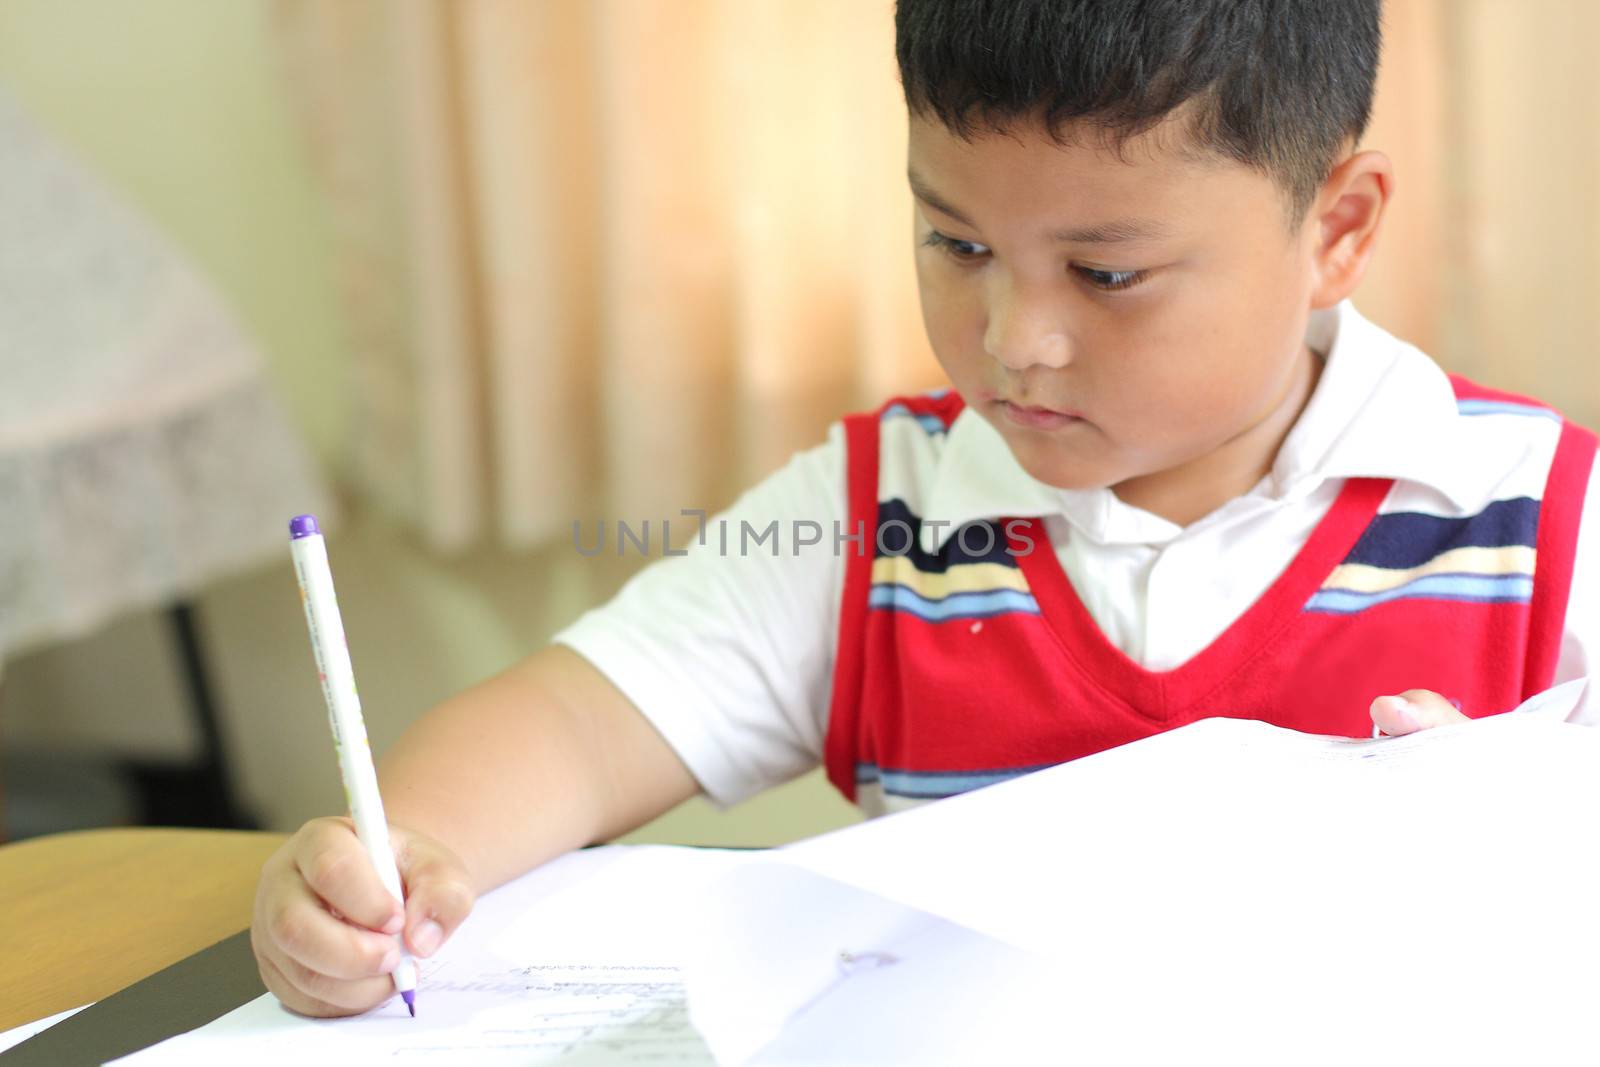 checking documents The boy intently. by myrainjom01